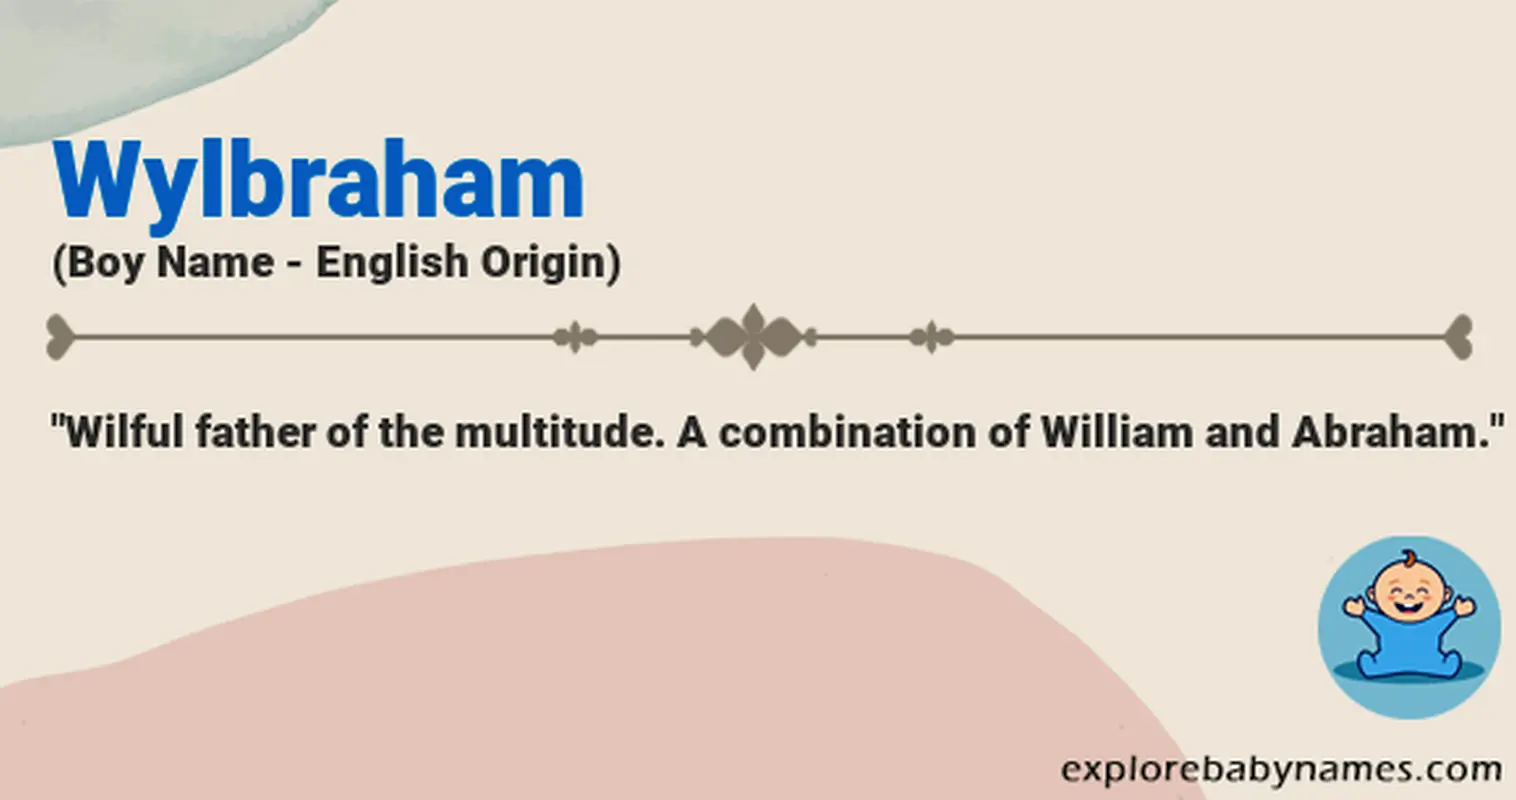 Meaning of Wylbraham